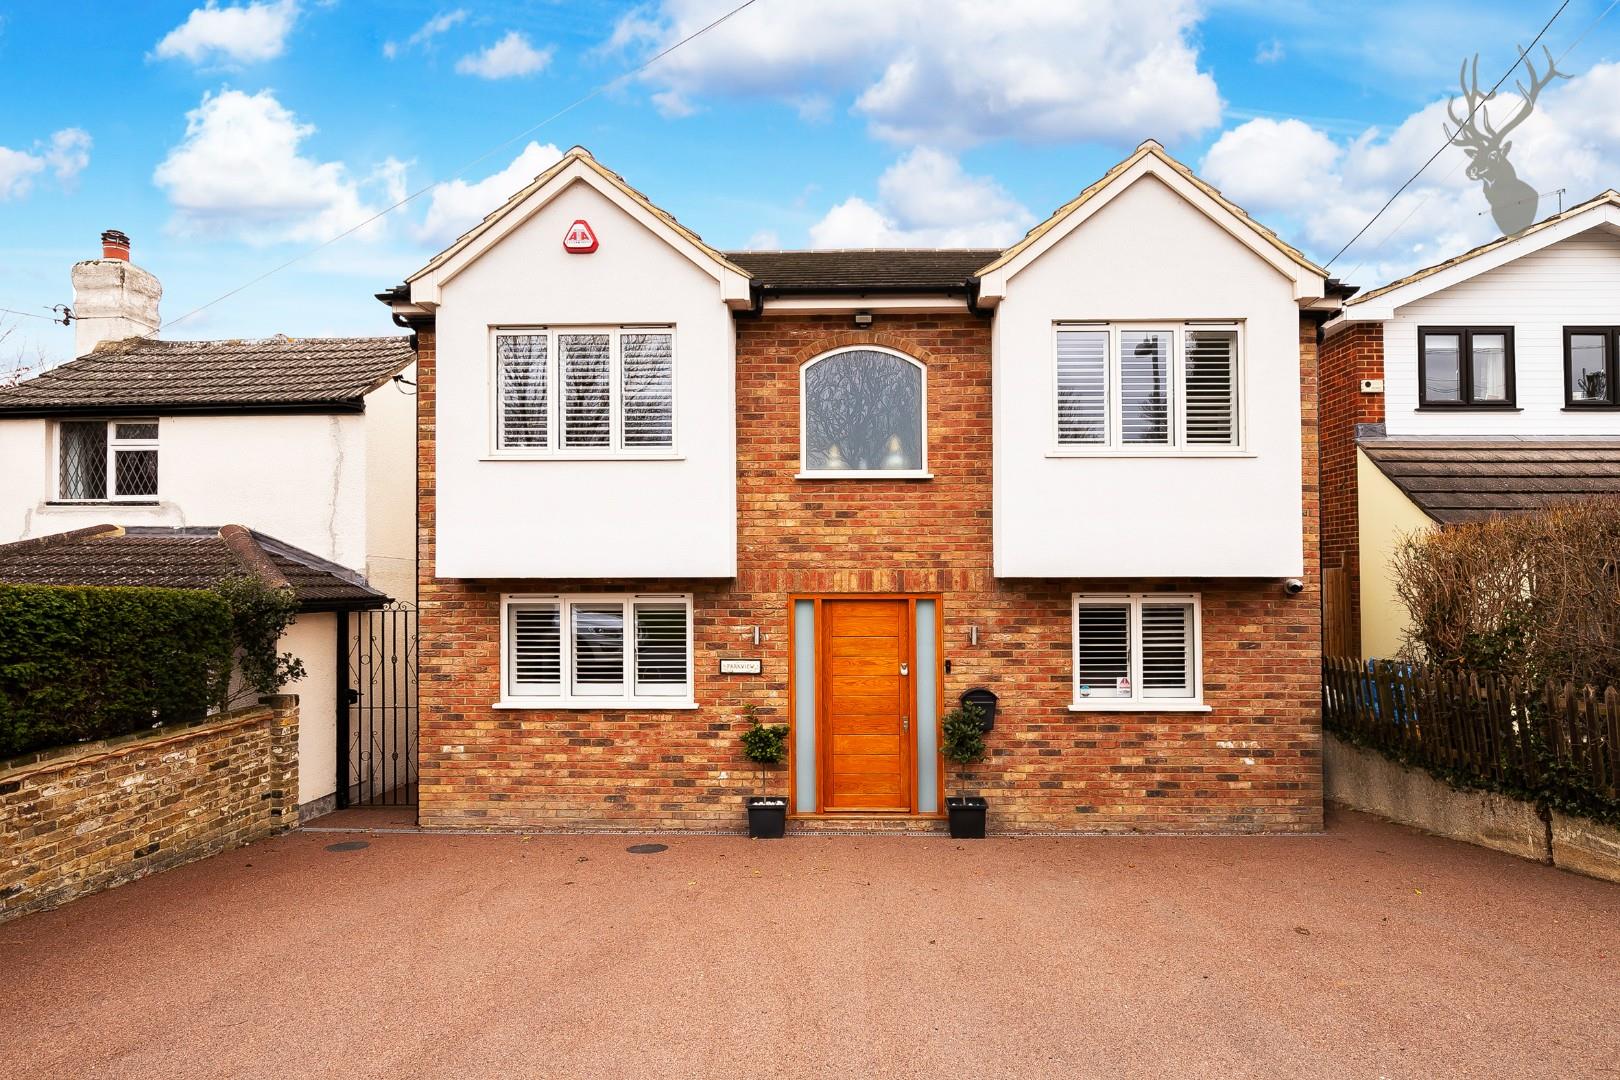 Similar Property: House - Detached in Brentwood